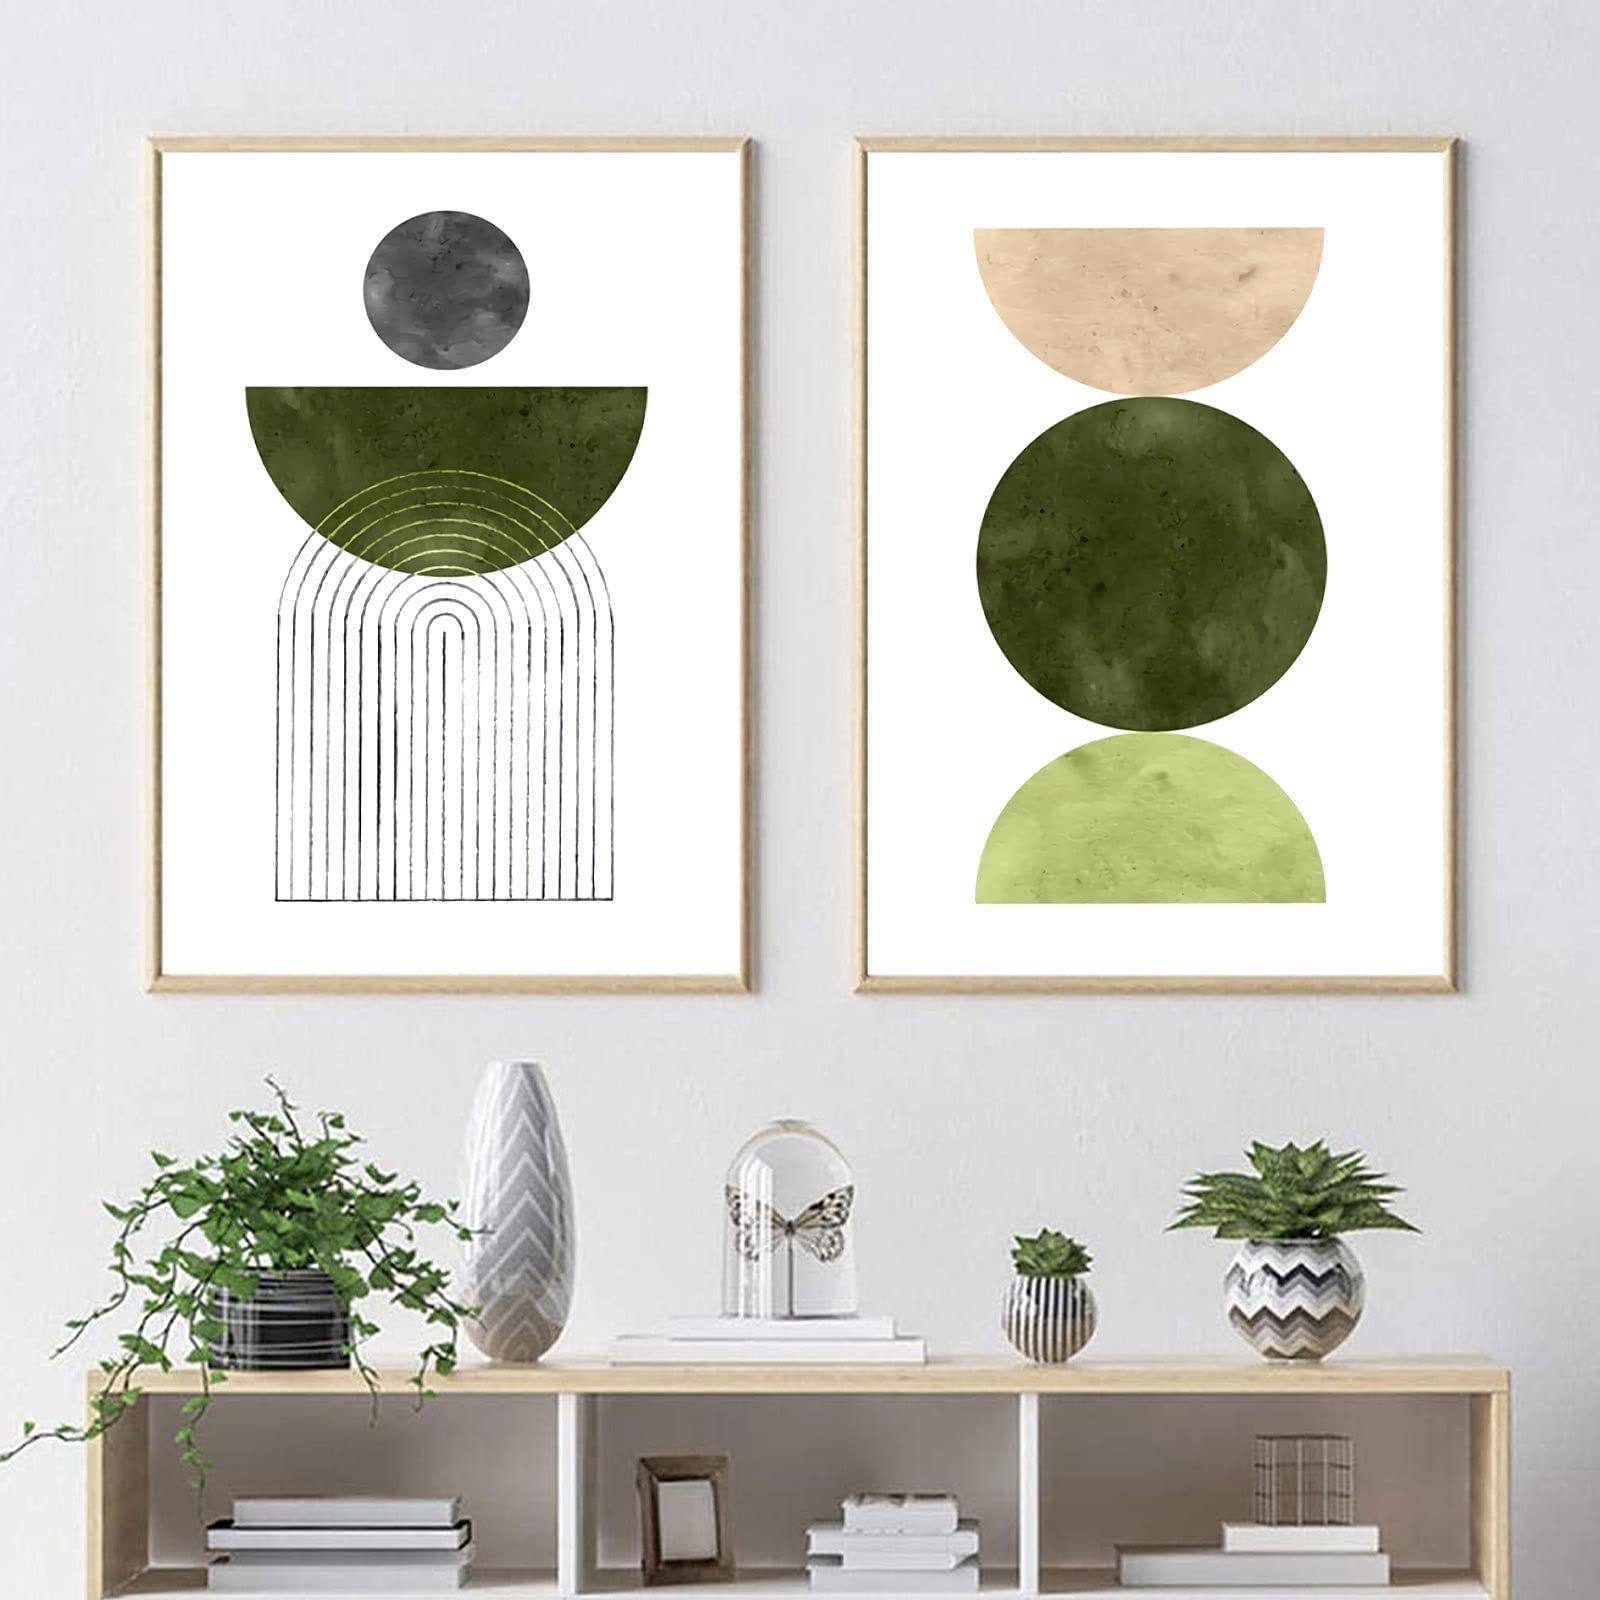 Olive Green Wall Art Intended For Trendy Amazon: Mid Century Wall Art Boho Wall Decor Sun Art Print Boho Wall  Prints Olive Green Wall Art Abstract Watercolor Painting Canvas Prints For  Home Decor Mid Century Modern Wall Decor 16x24inchx2 (Photo 1 of 15)